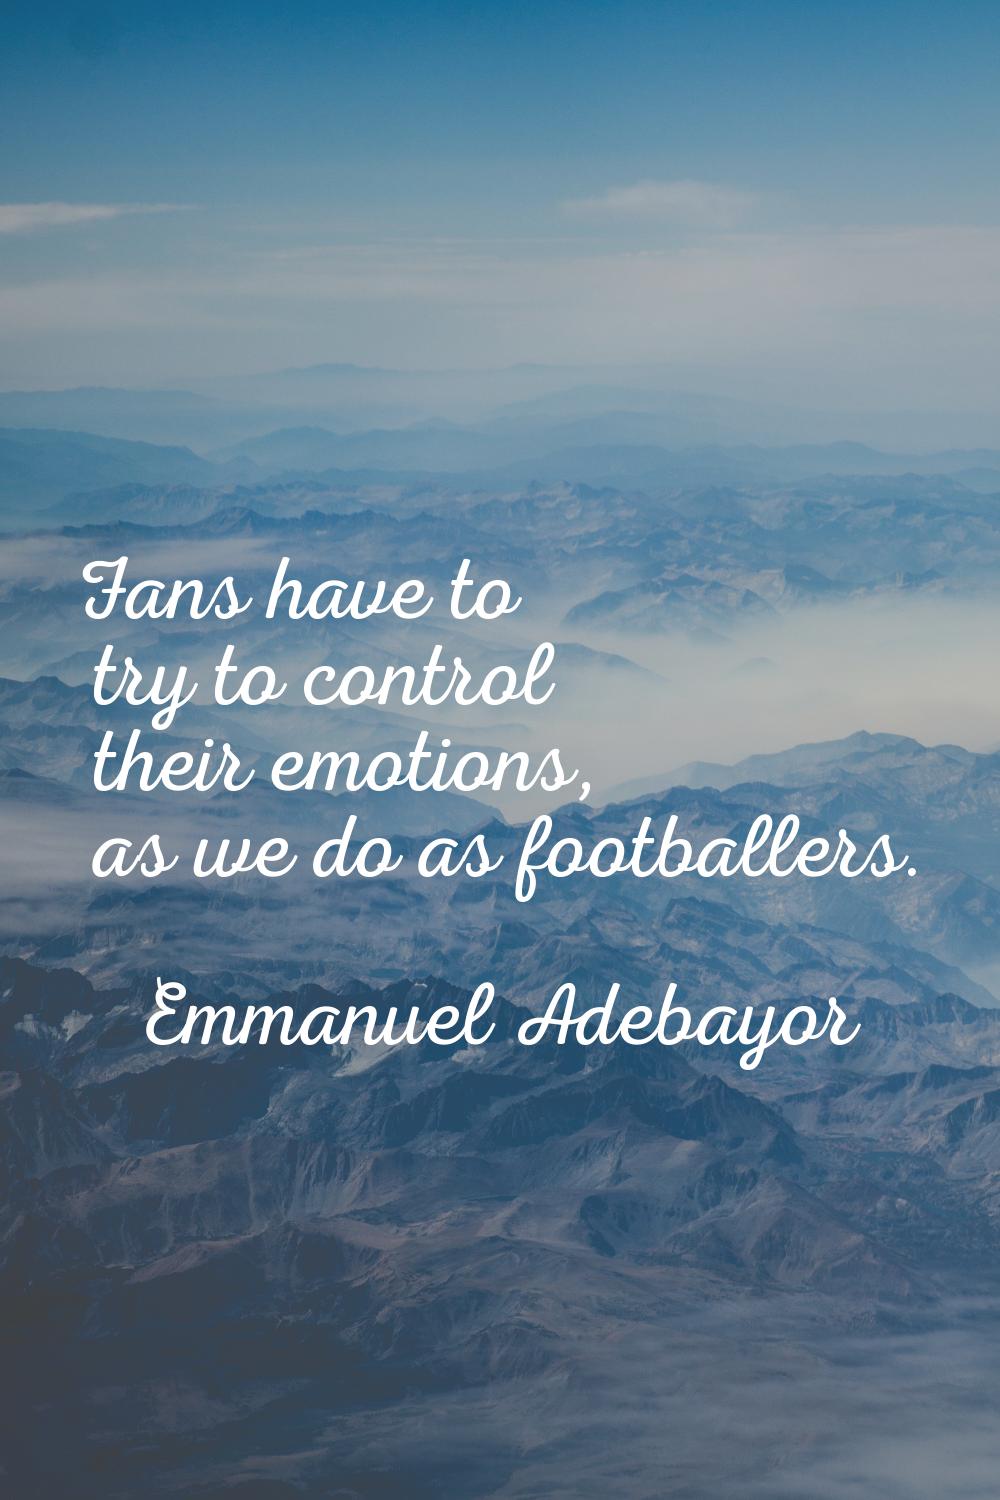 Fans have to try to control their emotions, as we do as footballers.